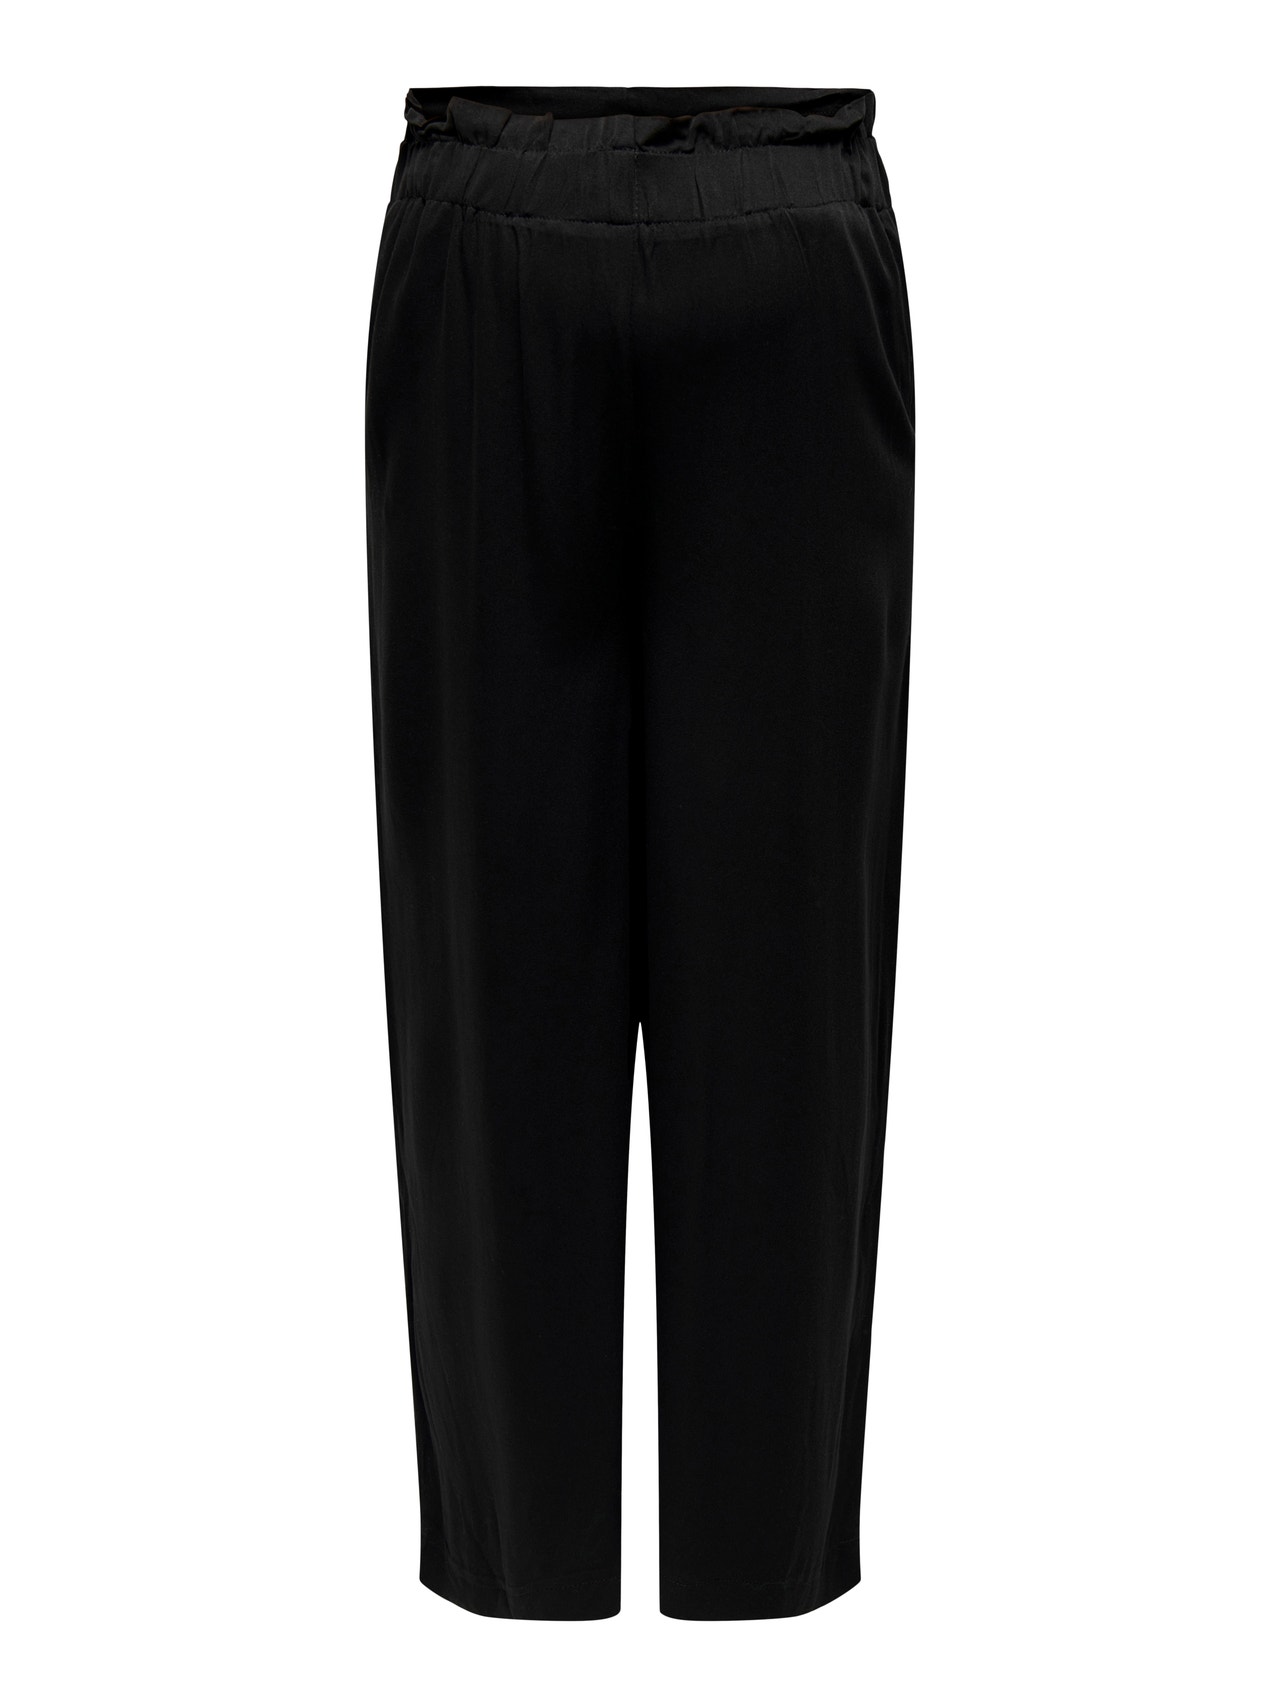 ONLY Mama high waist trousers -Black - 15267622